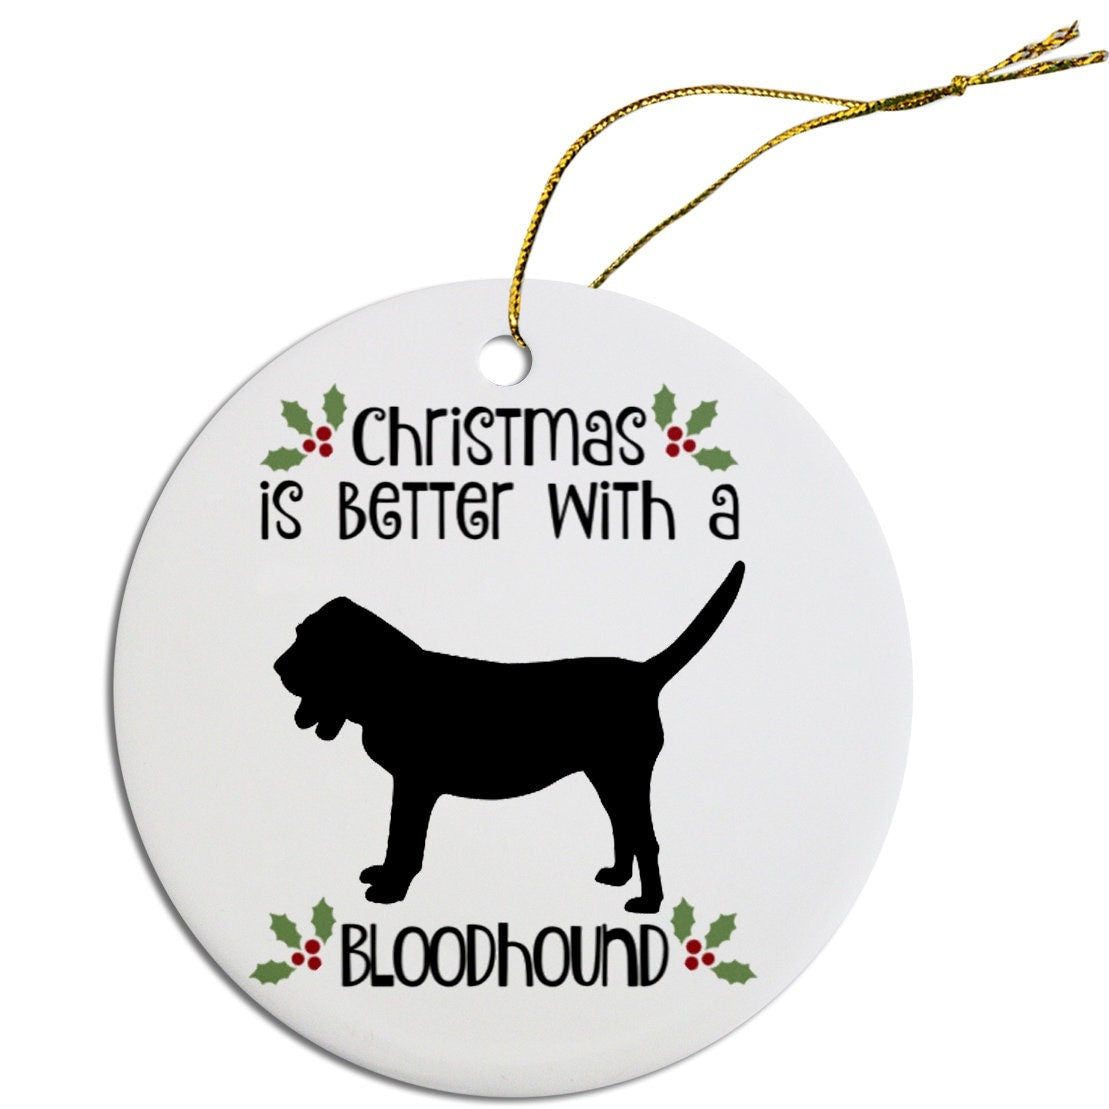 Dog Breed Specific Round Christmas Ornament, "Bloodhound"